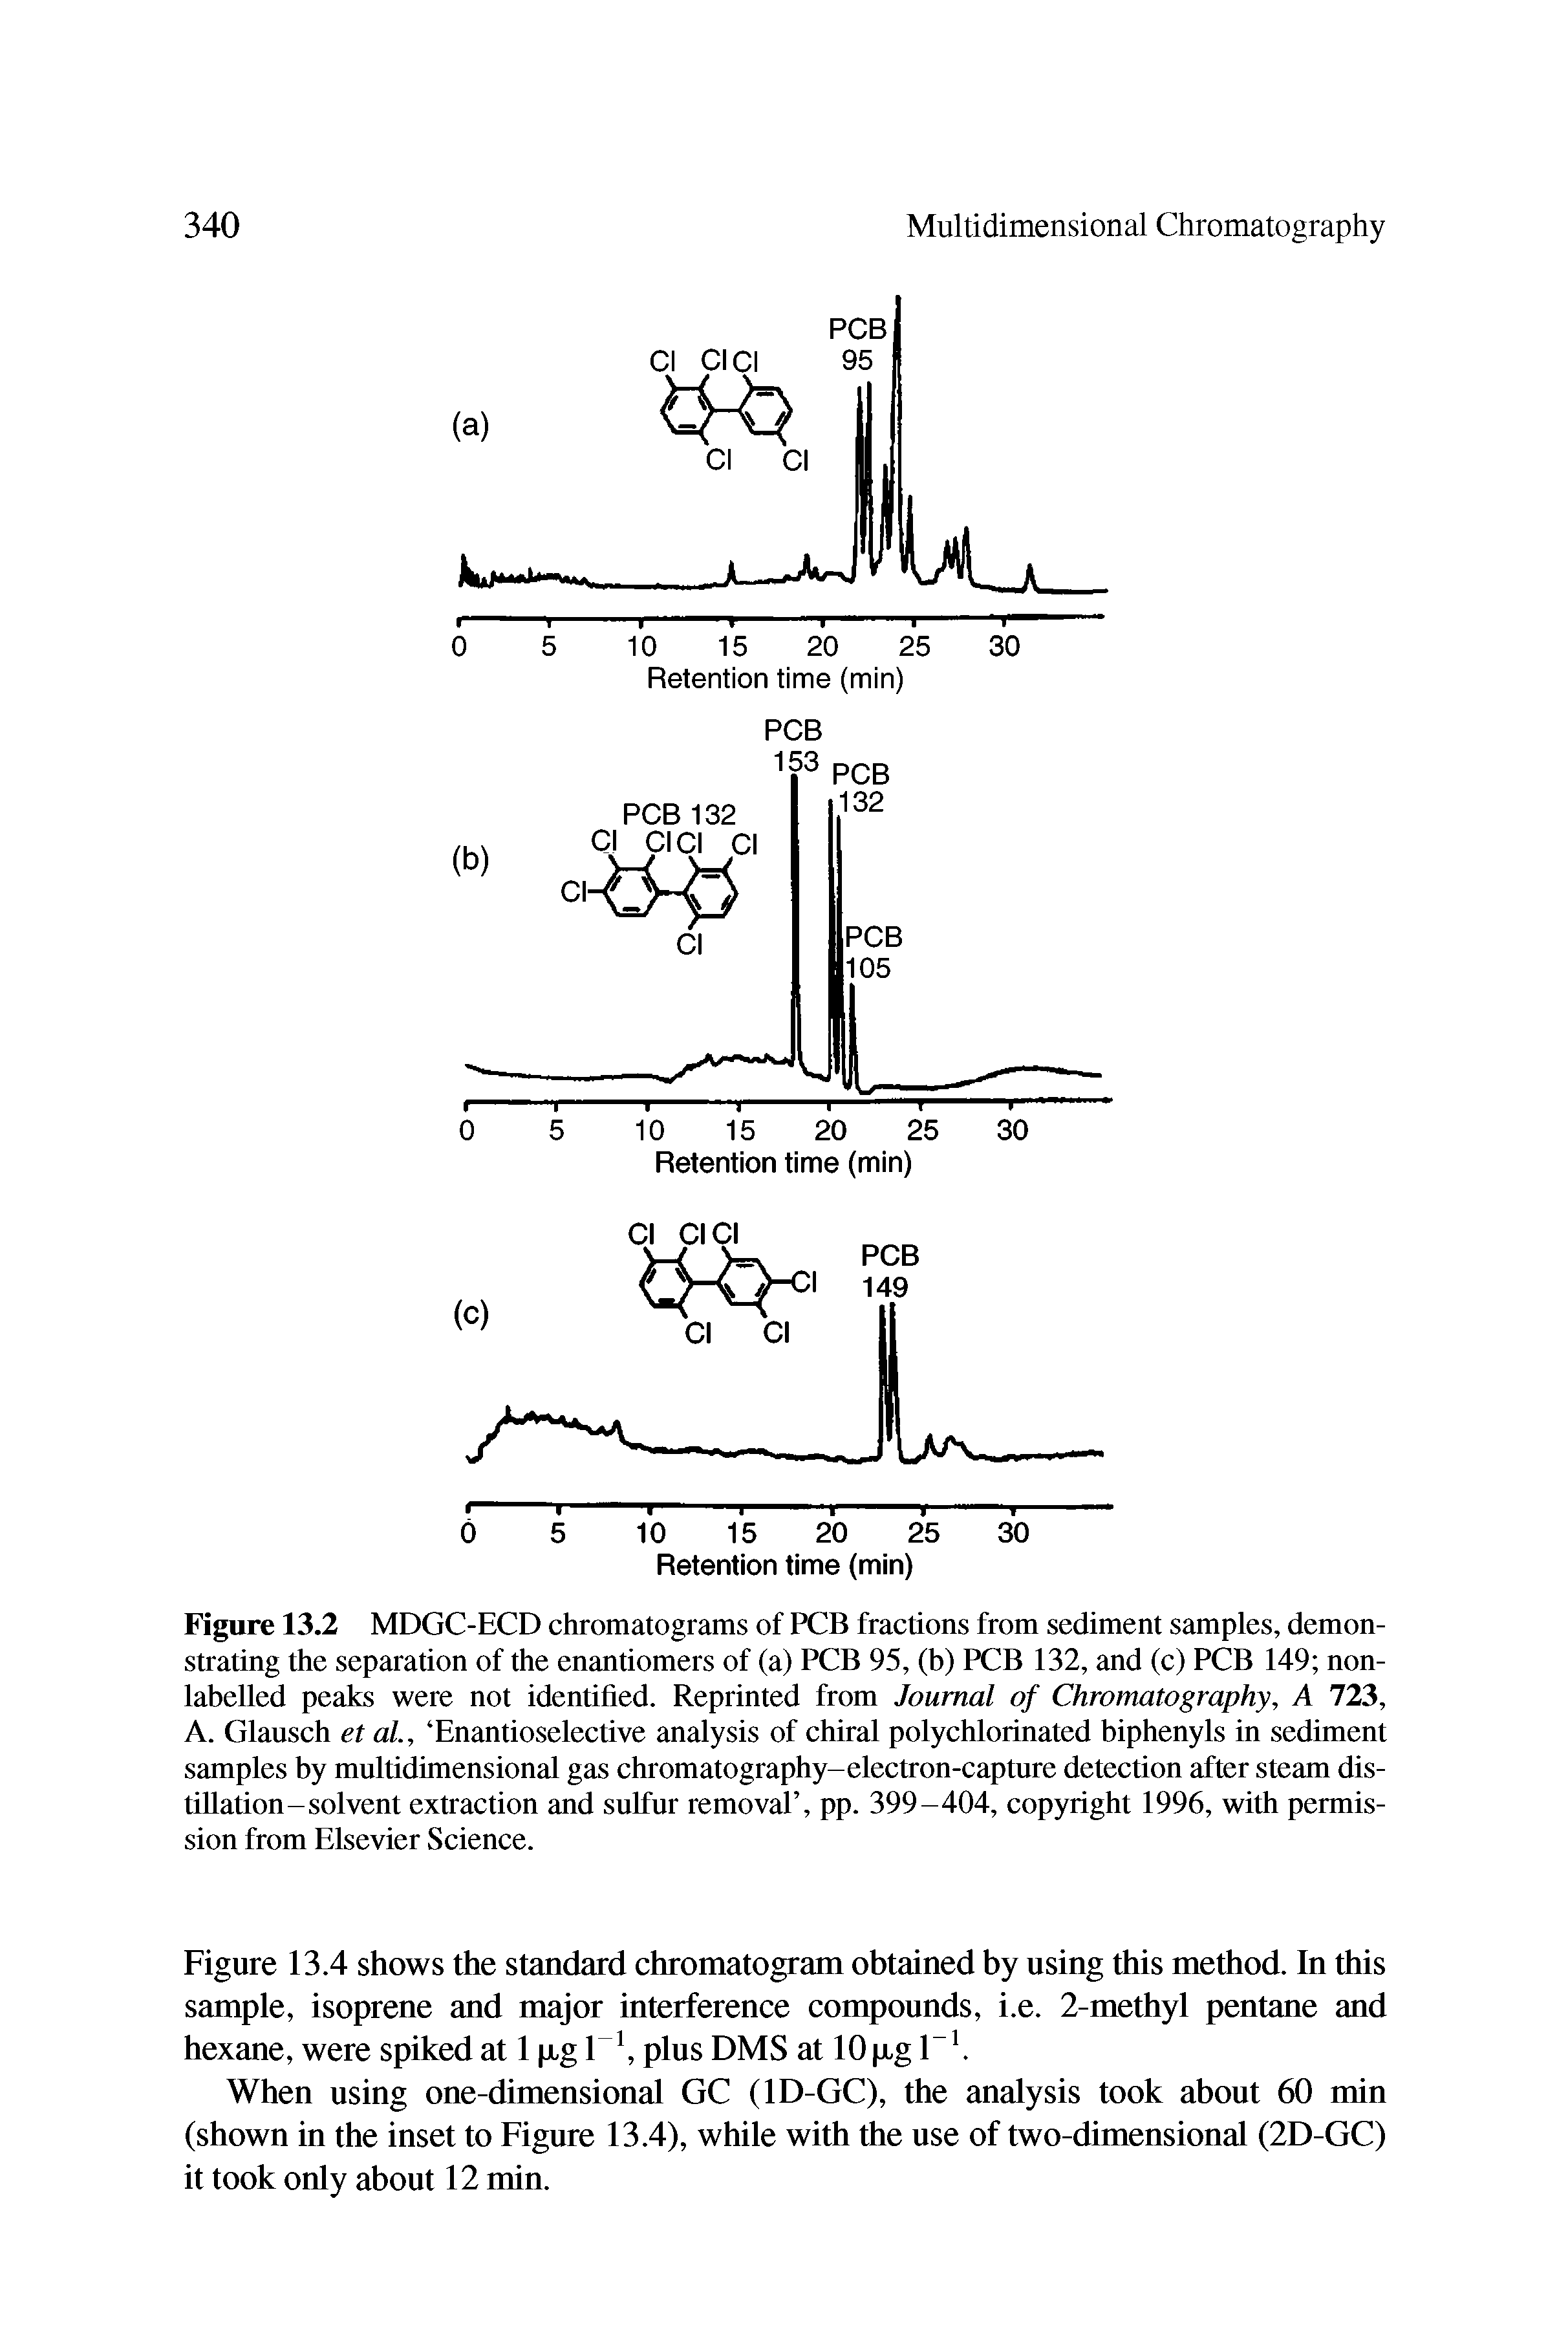 Figure 13.2 MDGC-ECD chromatograms of PCB fractions from sediment samples, demonstrating the separation of the enantiomers of (a) PCB 95, (b) PCB 132, and (c) PCB 149 non-labelled peaks were not identified. Reprinted from Journal of Chromatography, A 723, A. Glausch et al., Enantioselective analysis of chiral polychlorinated biphenyls in sediment samples by multidimensional gas chromatography-electron-capture detection after steam distillation-solvent extraction and sulfur removal , pp. 399-404, copyright 1996, with permission from Elsevier Science.